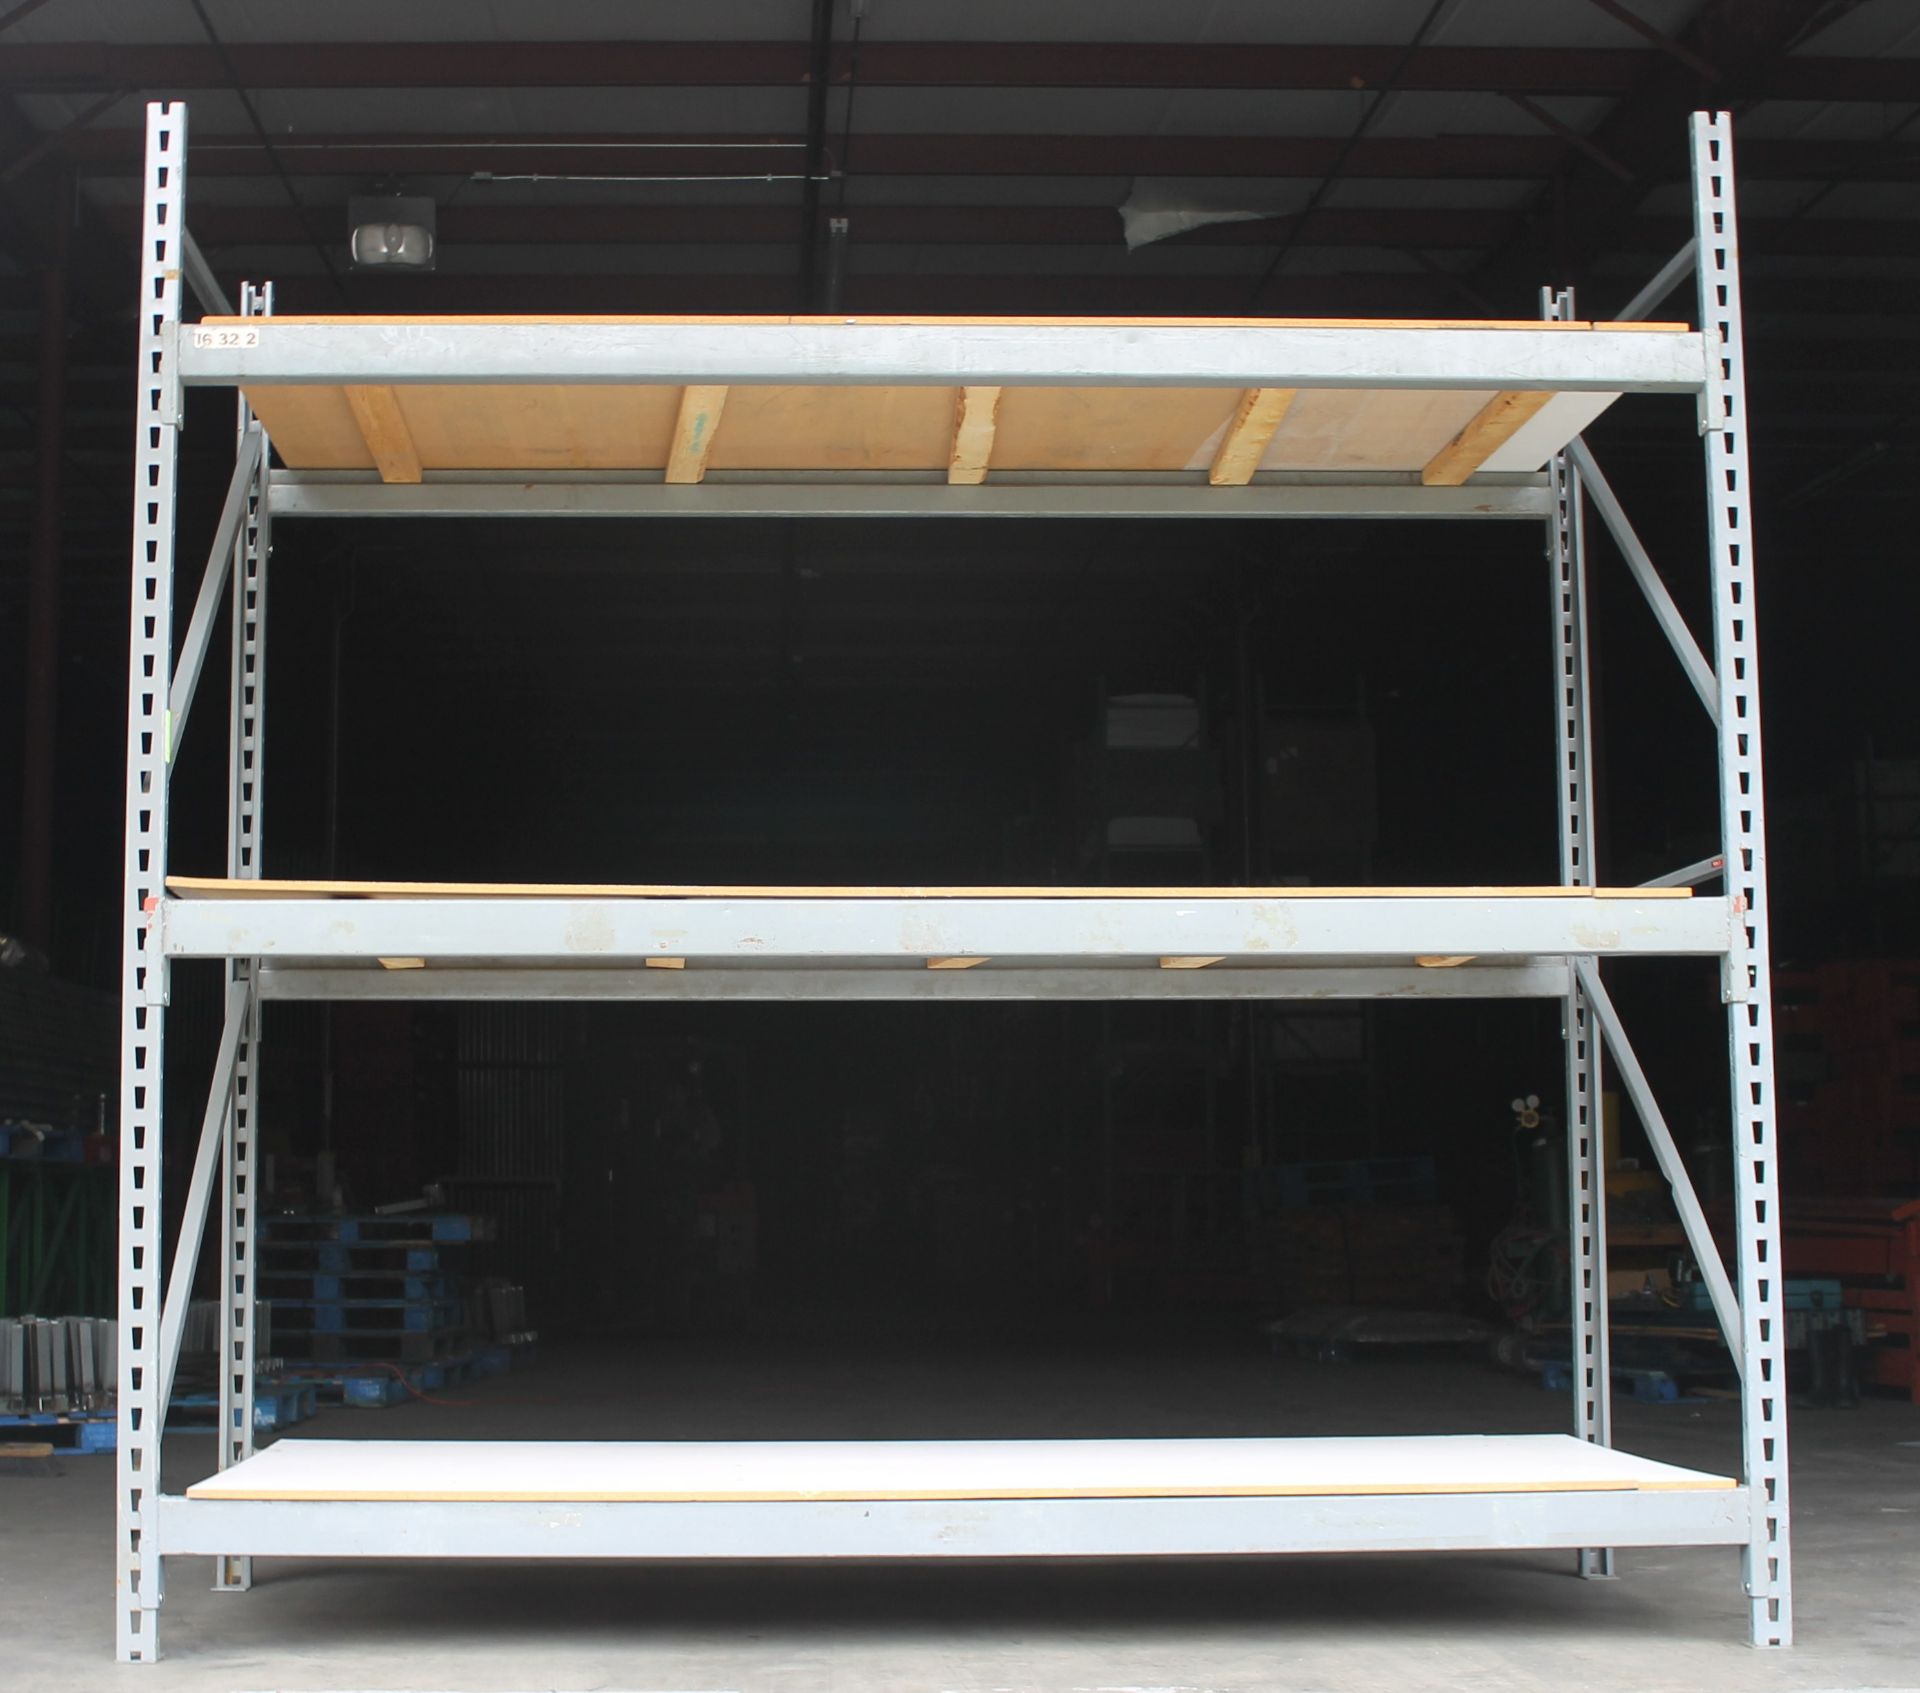 14 BAYS OF 120"H X 48"D X 117"L INDUSTRIAL SHELVING WITH LAMINATED WOOD DECKING, - Image 3 of 4